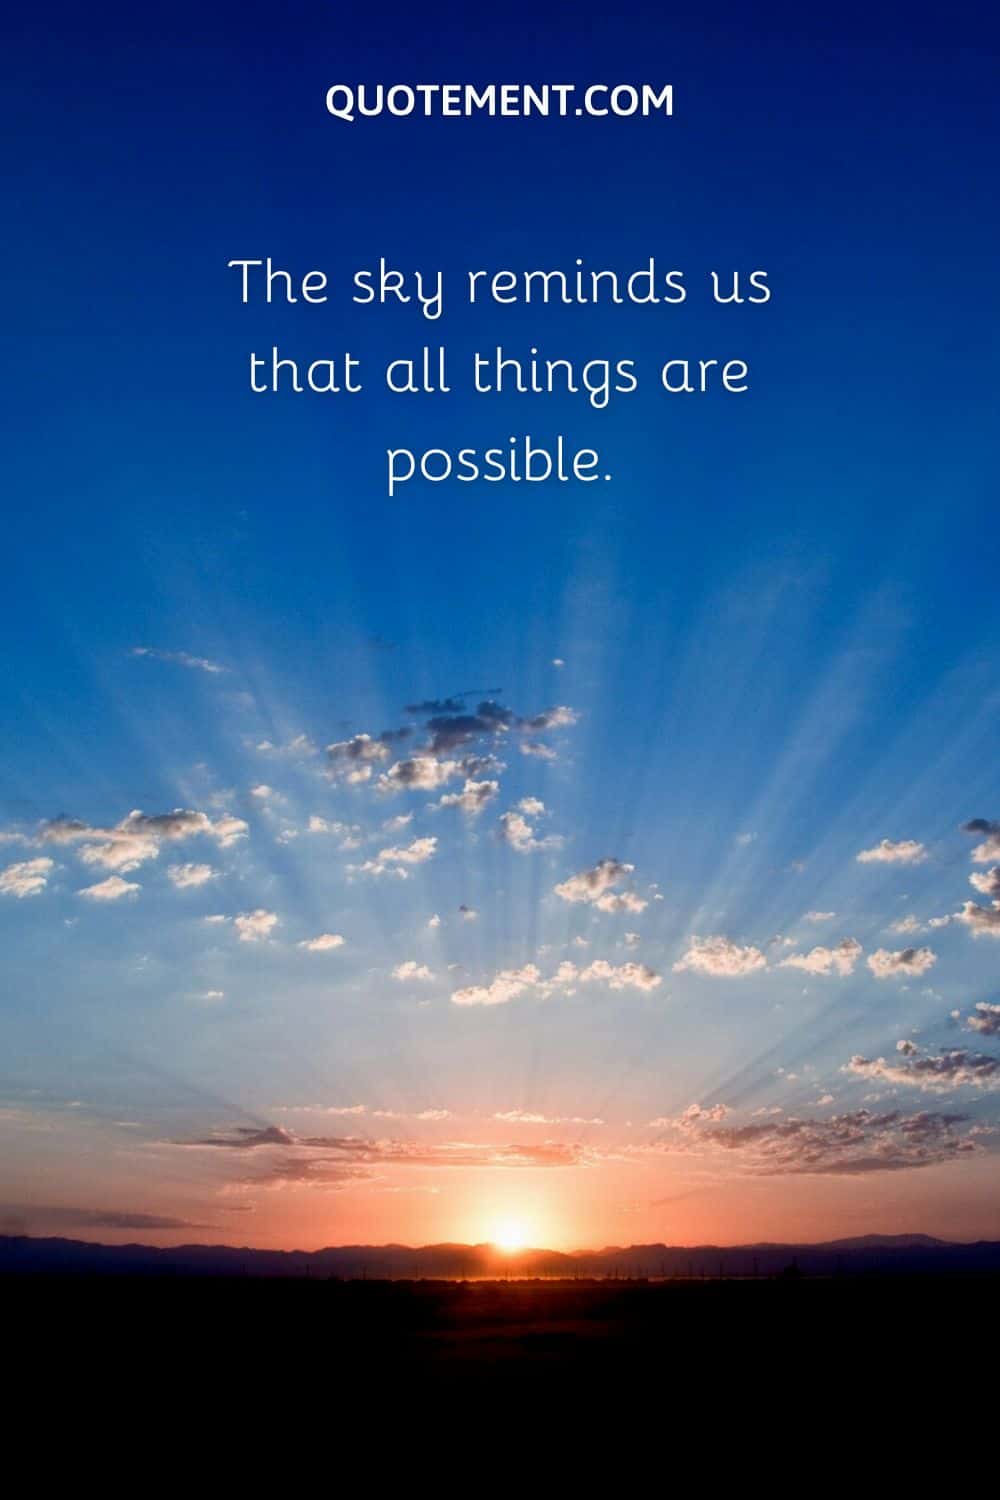 The sky reminds us that all things are possible.